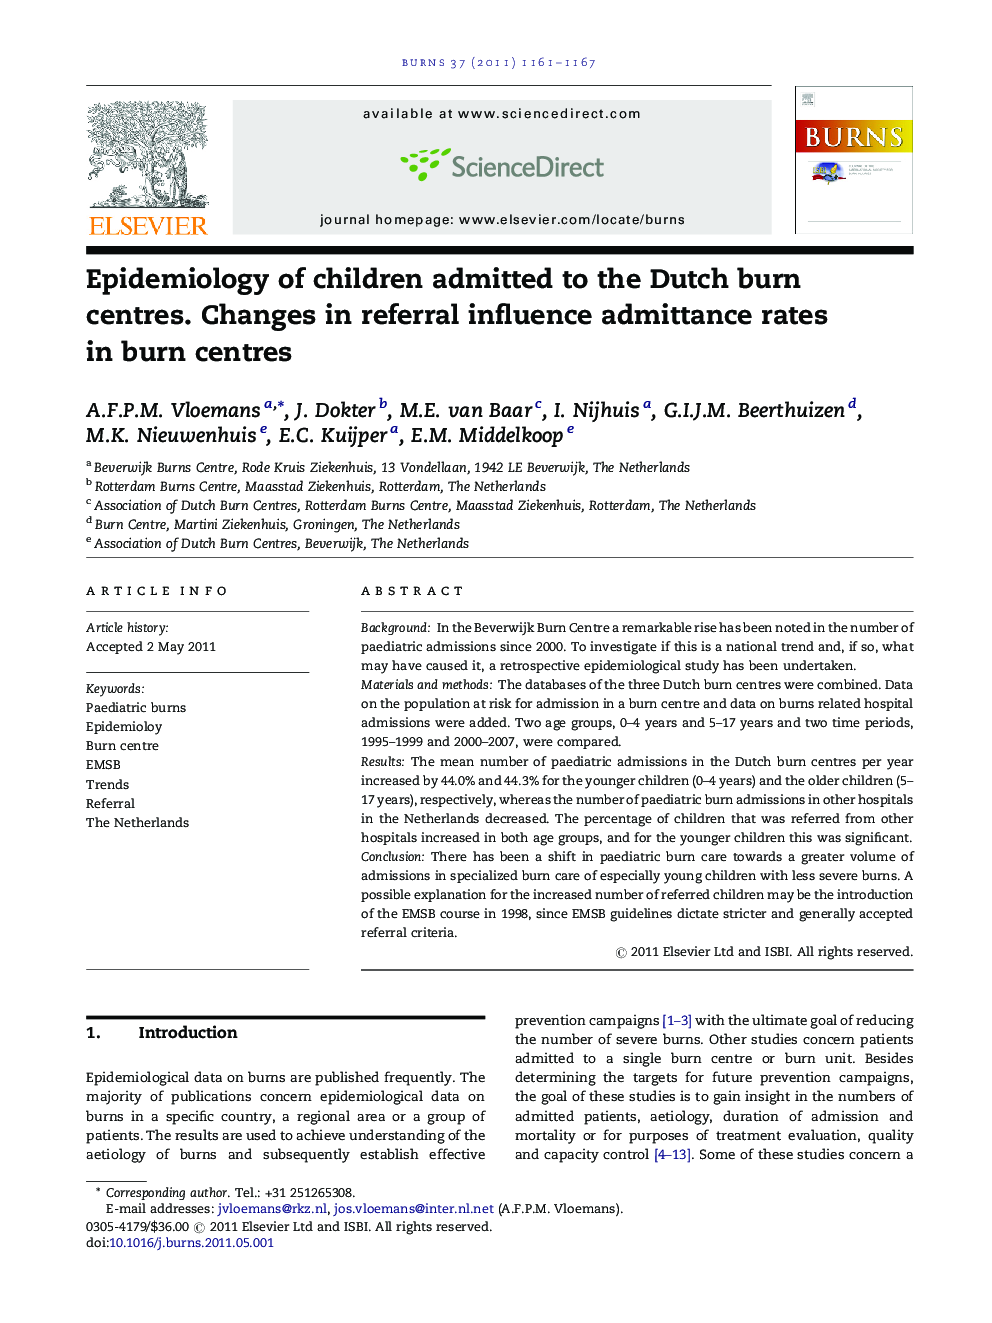 Epidemiology of children admitted to the Dutch burn centres. Changes in referral influence admittance rates in burn centres